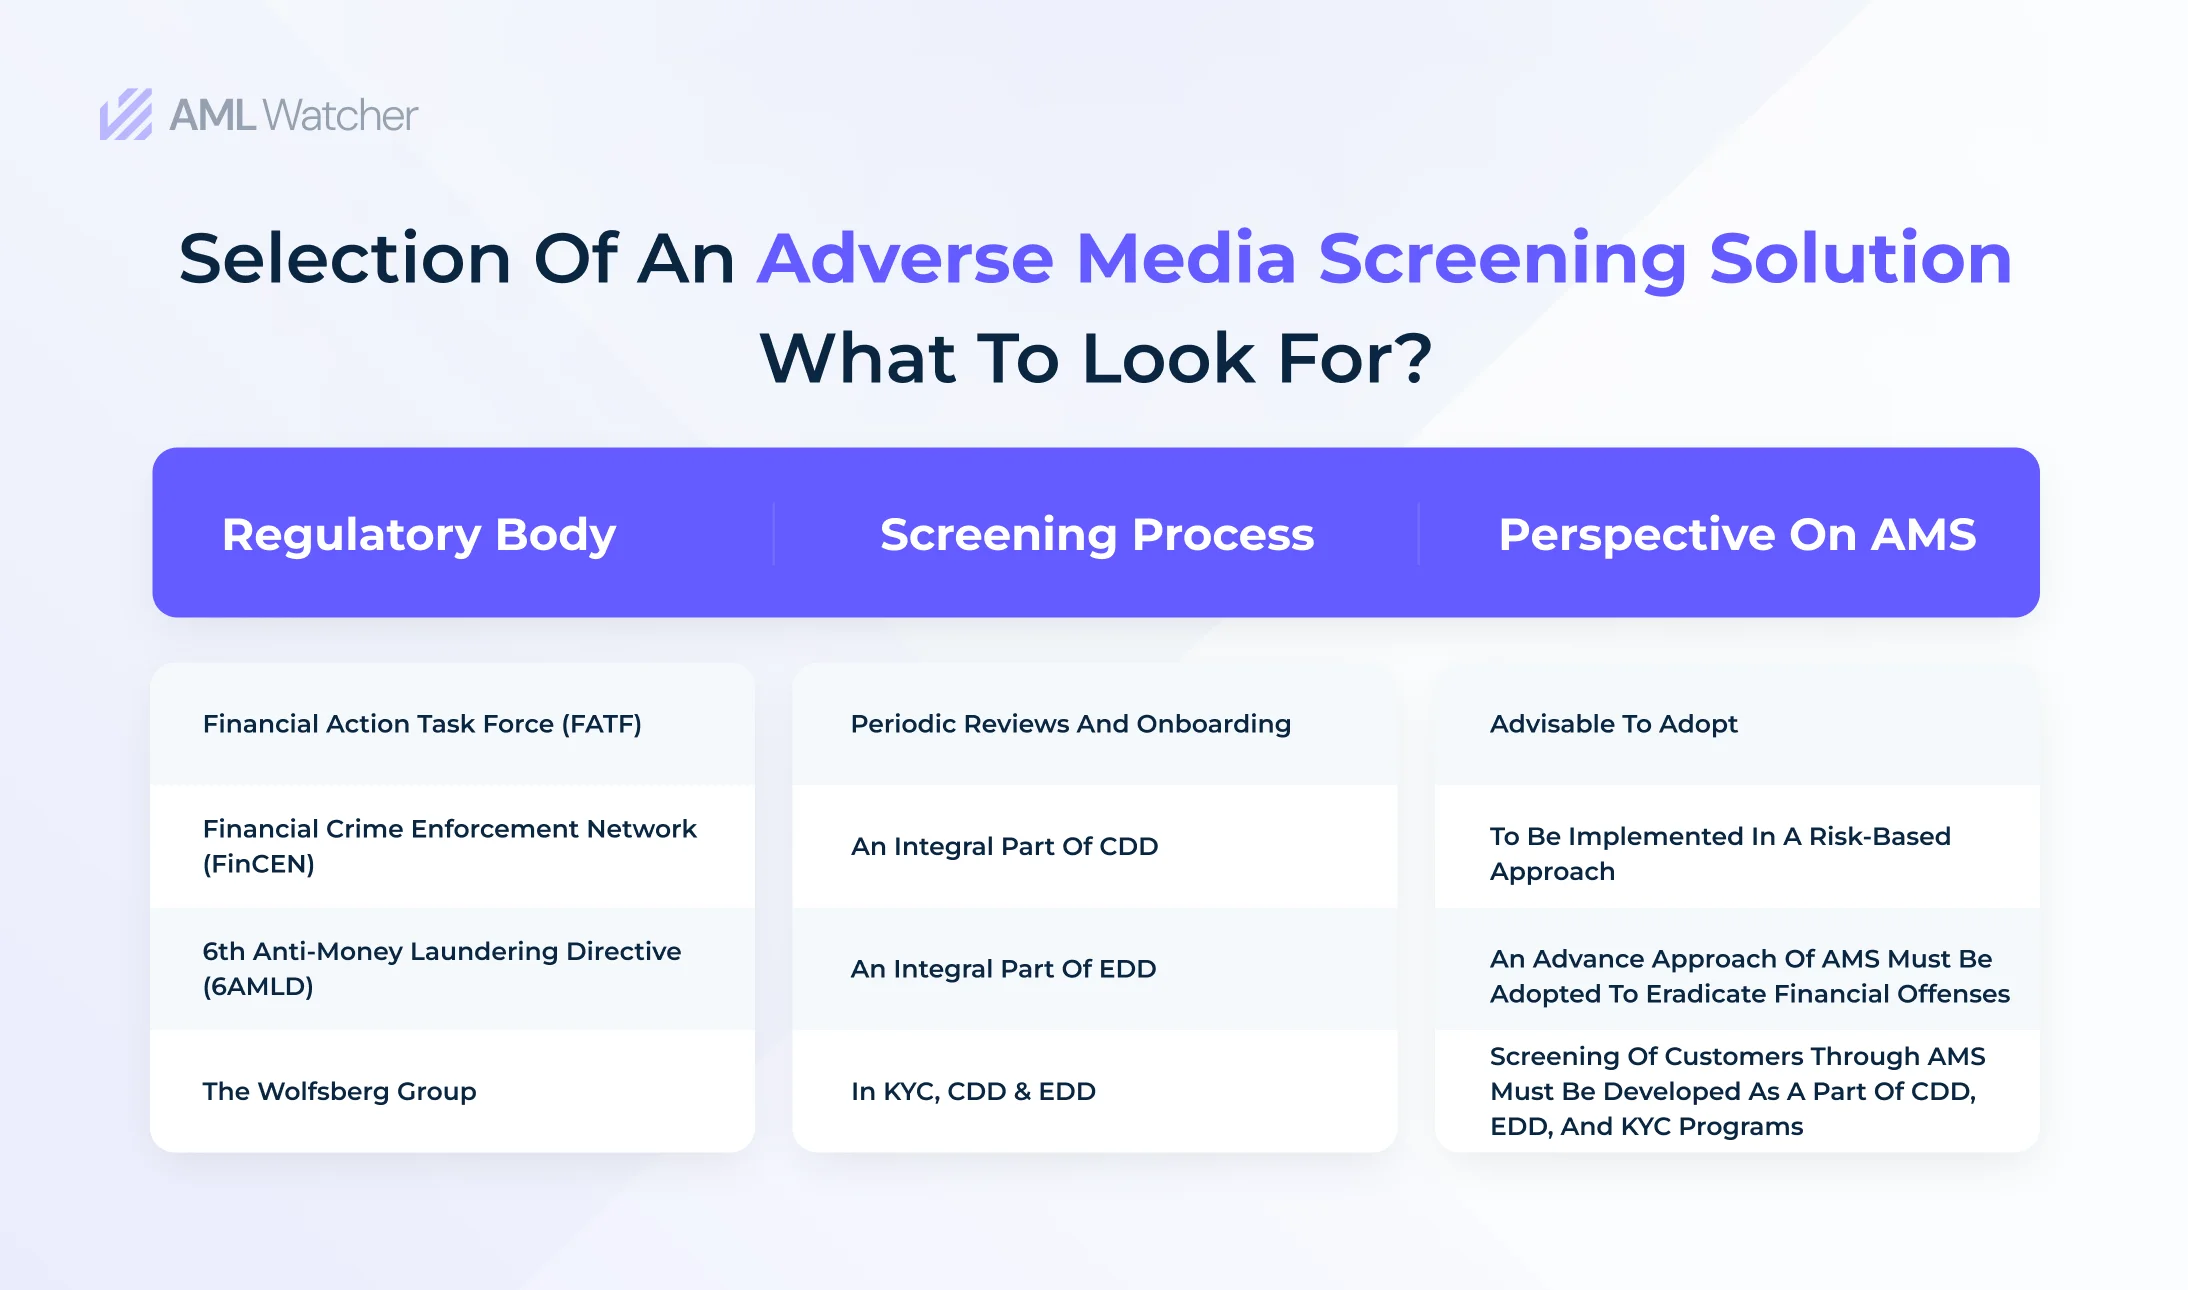 The regulatory bodies and their enforcement on implementing adverse media screening as a part of AML measures